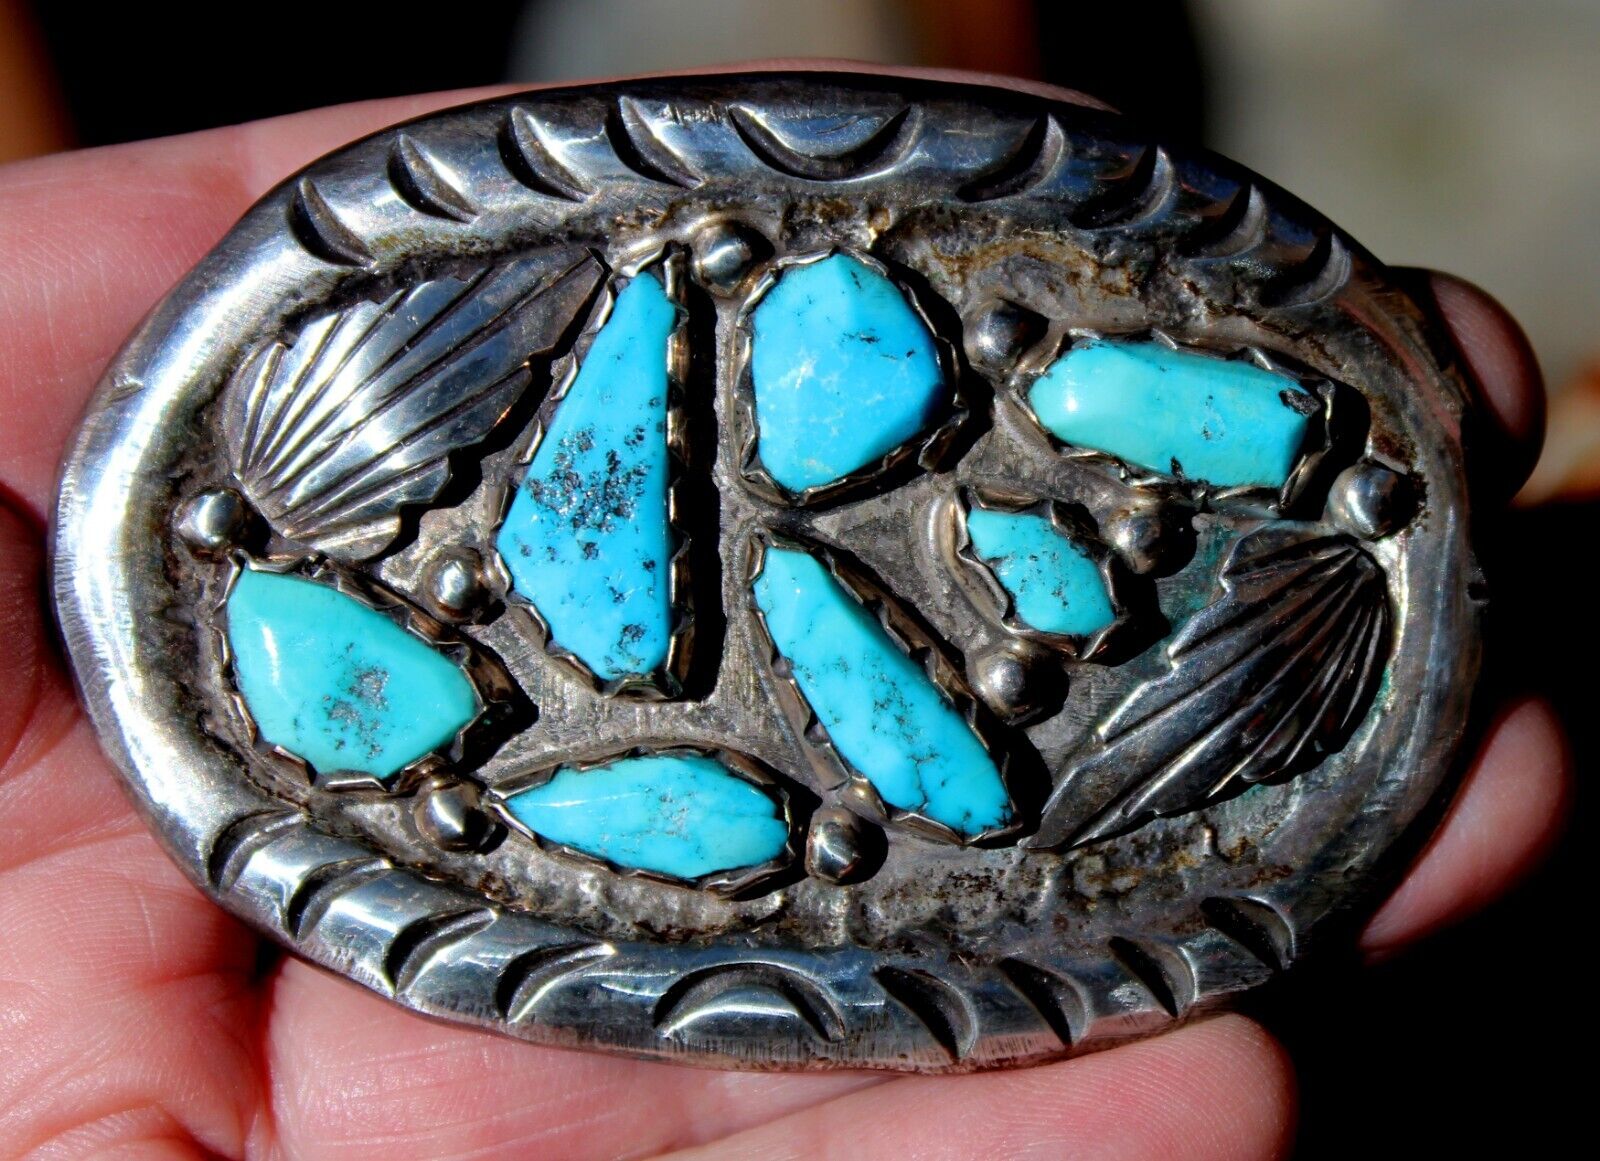 BIG Old Angie CHEAMA ZUNI Handmade Sterling Silver Turquoise Stones Belt Buckle